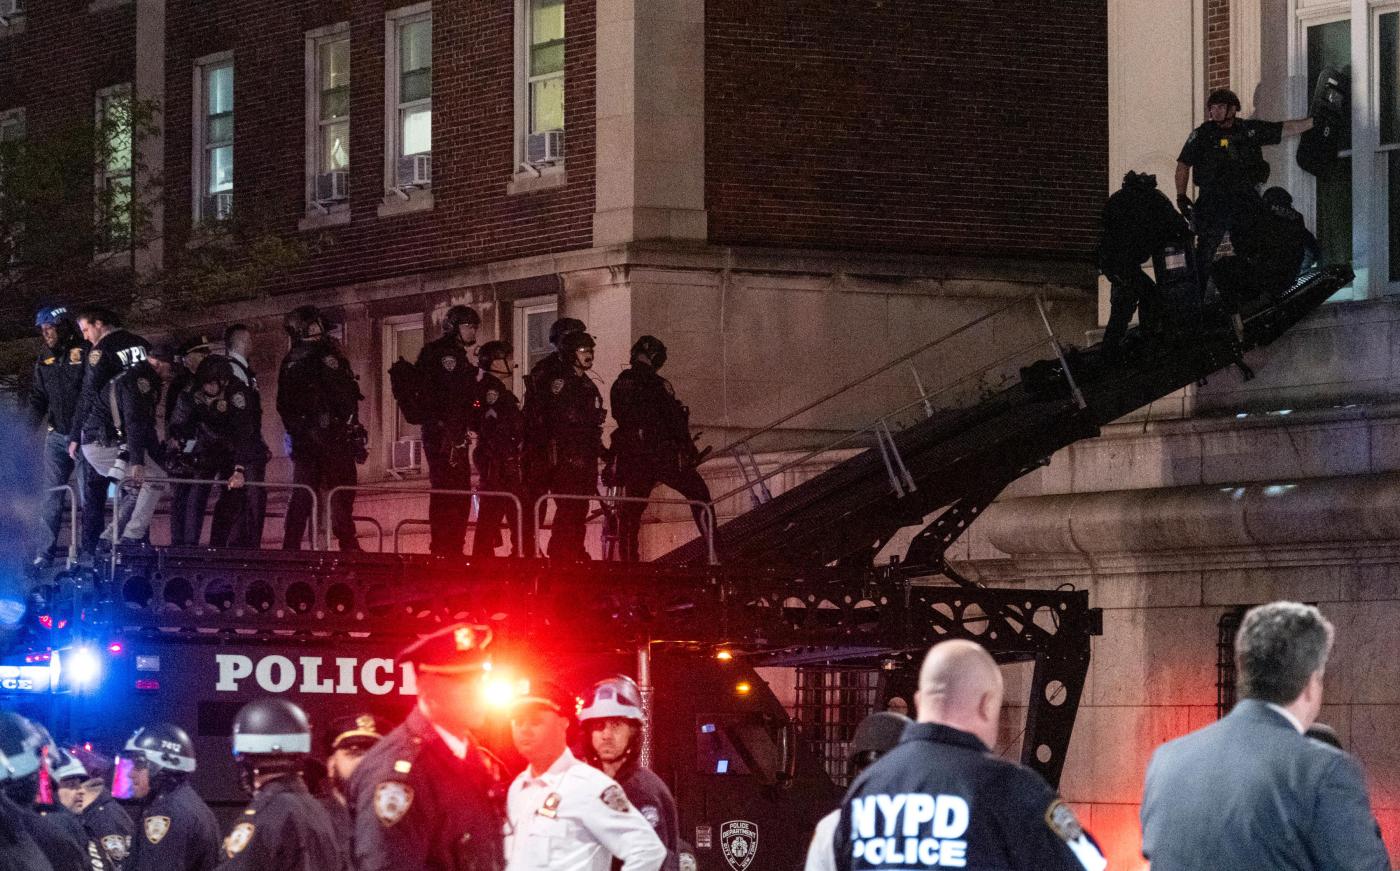 dueling-protesters-clash-at-ucla-hours-after-police-clear-pro-palestinian-demonstration-at-columbia